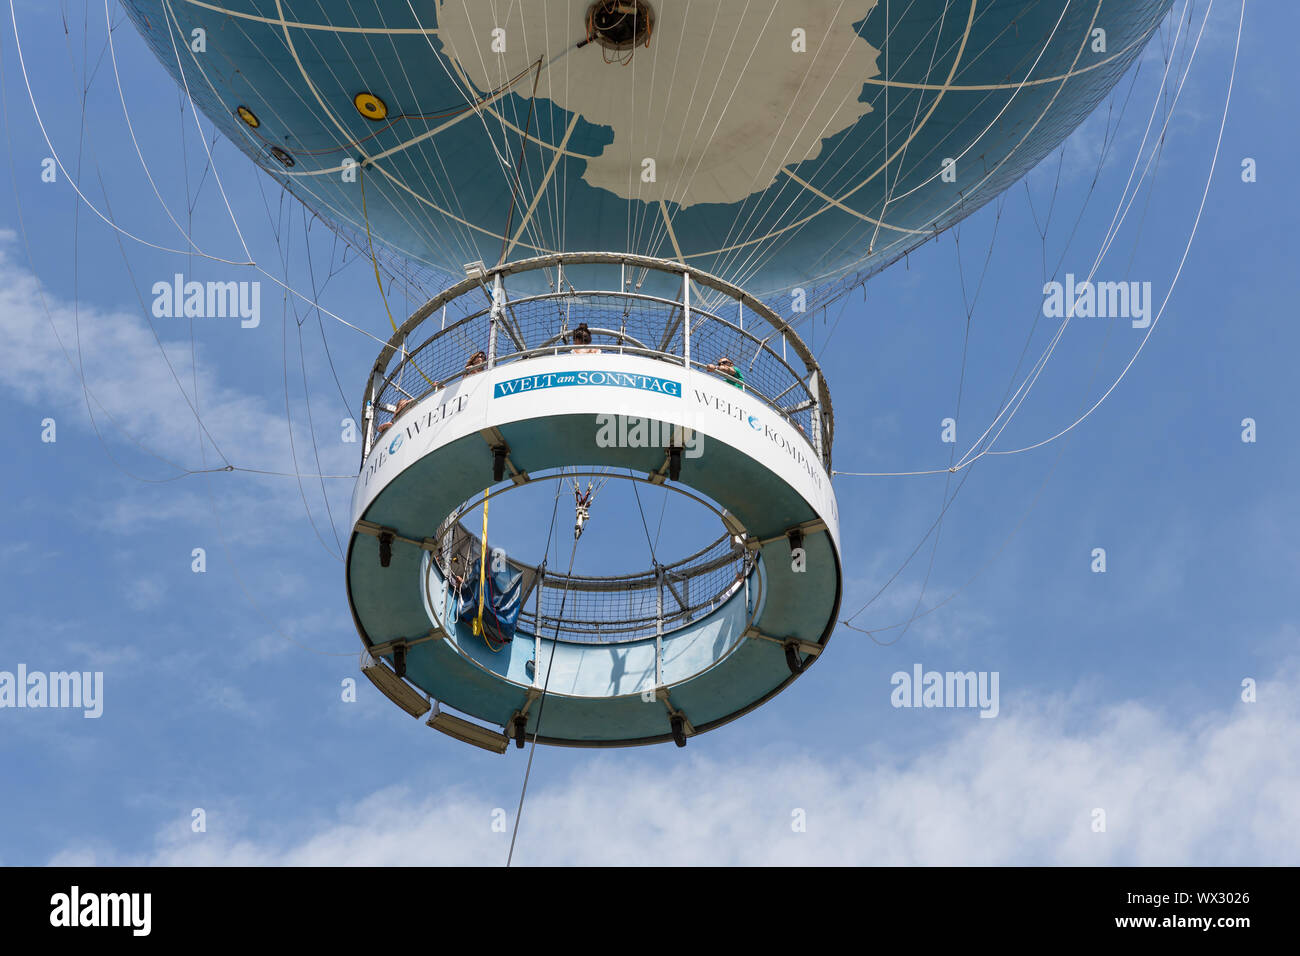 The Welt Balloon is a hot air balloon above Berlin, Germany Stock Photo -  Alamy